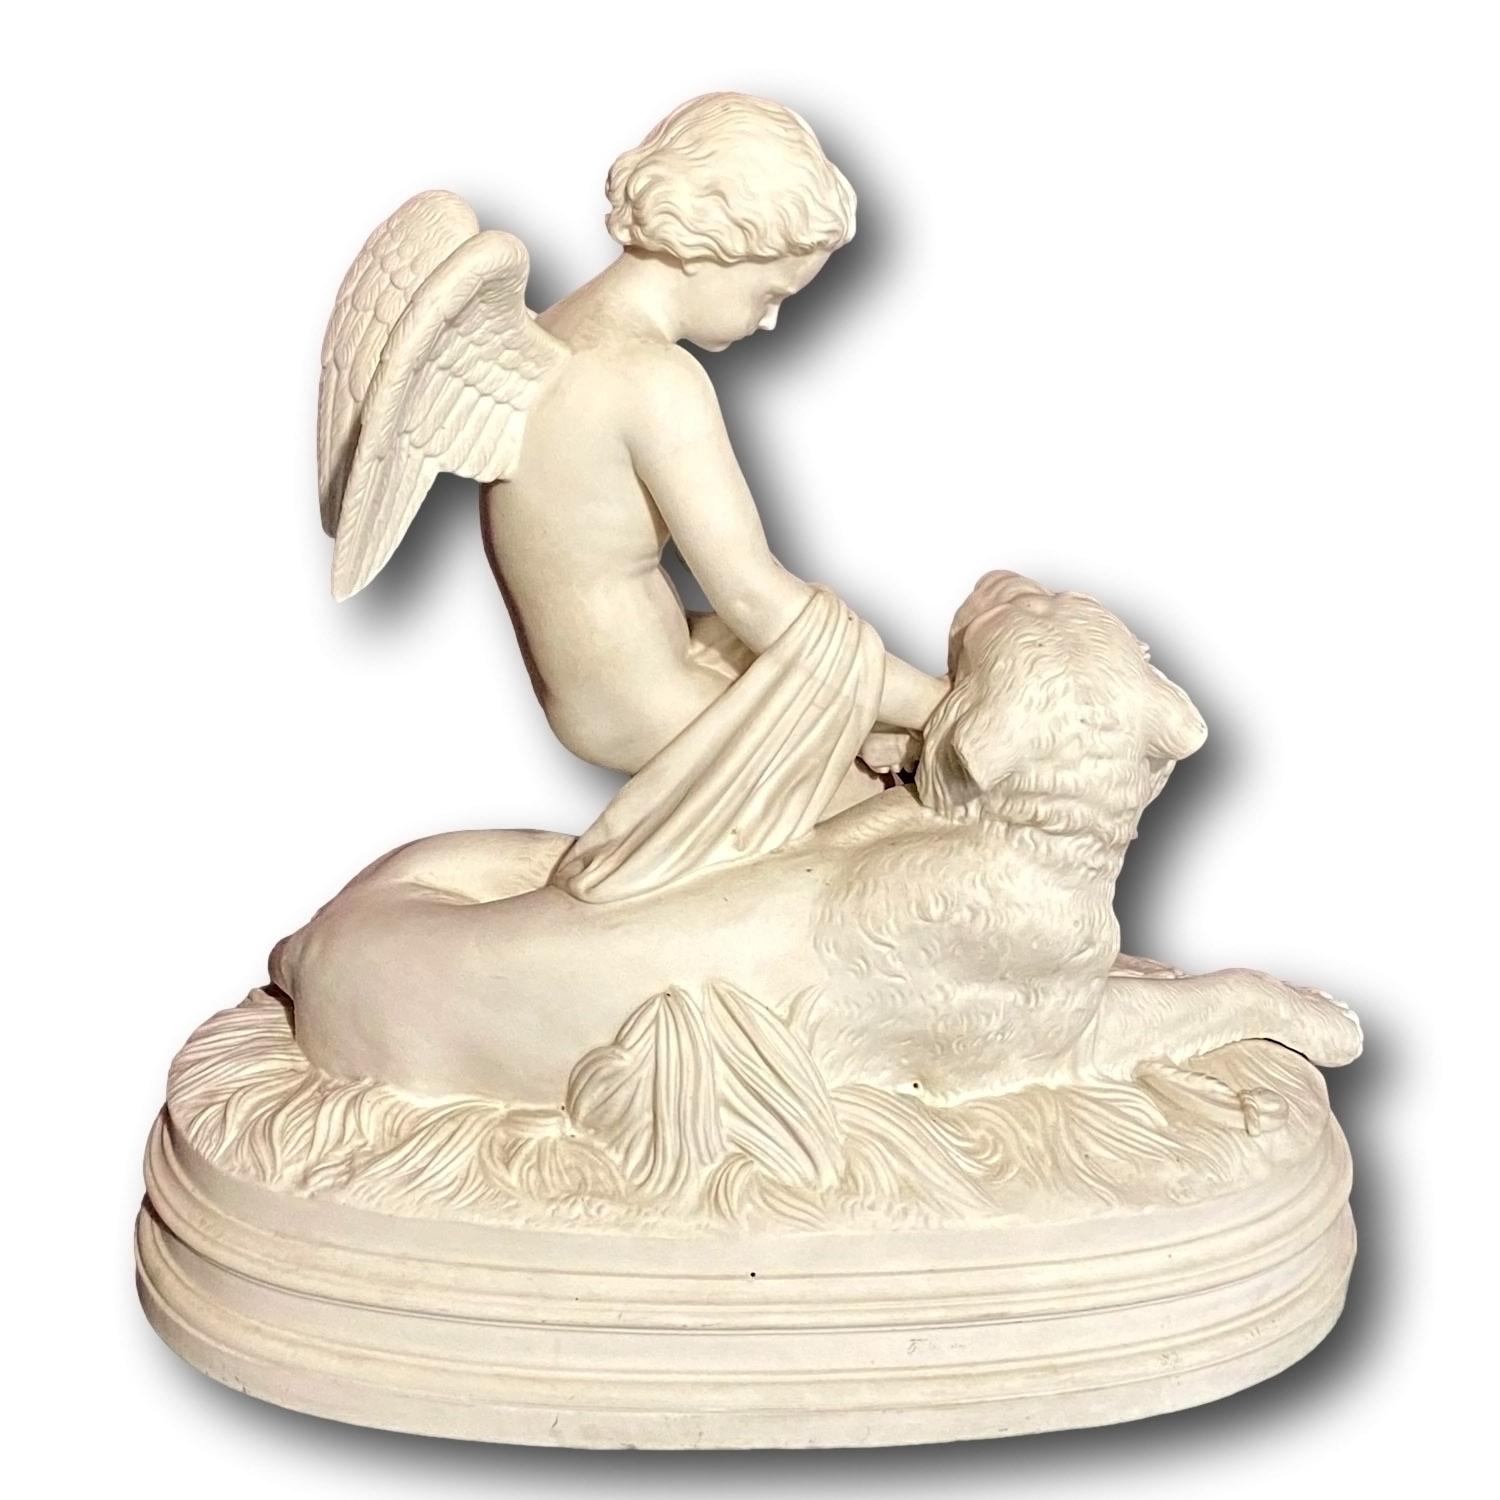 English Victorian Parian Ware Figure In Good Condition For Sale In Newark, England